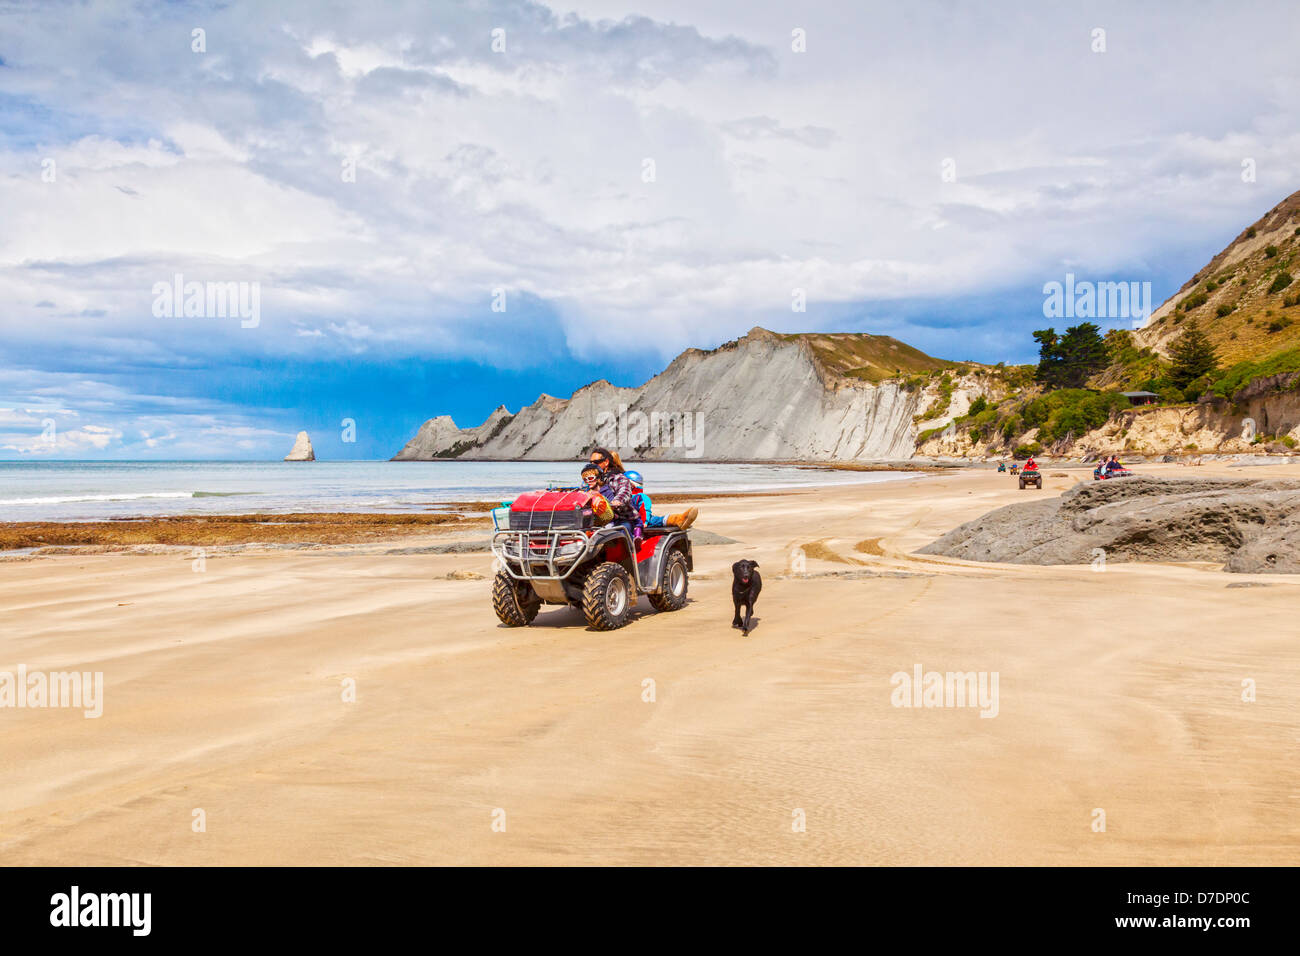 Family riding on quadbike, Cape Kidnappers, Hawkes Bay, New Zealand, with black labrador running alongside. Stock Photo